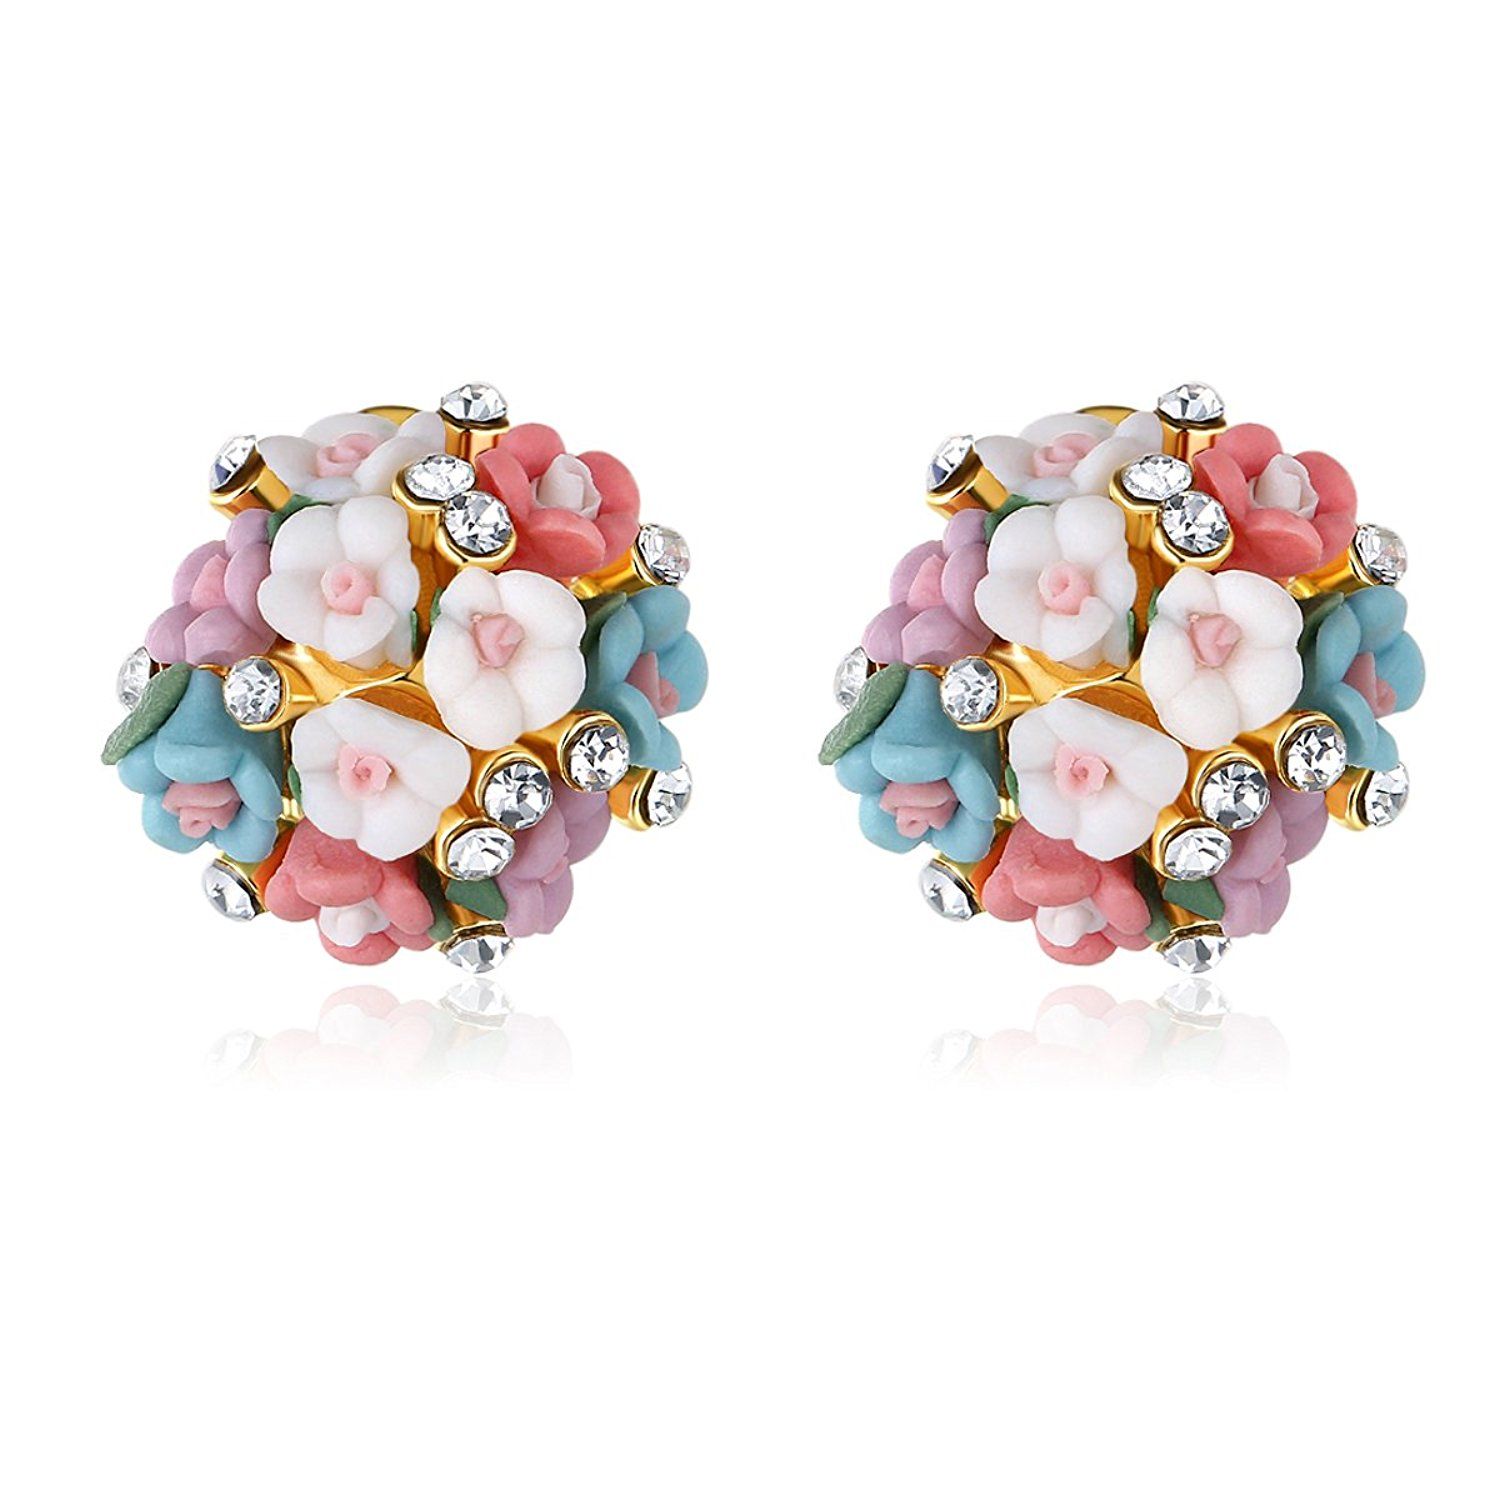 Buy Crunchy Fashion Multicolored Floret Stud Earrings for Girls - Purplle